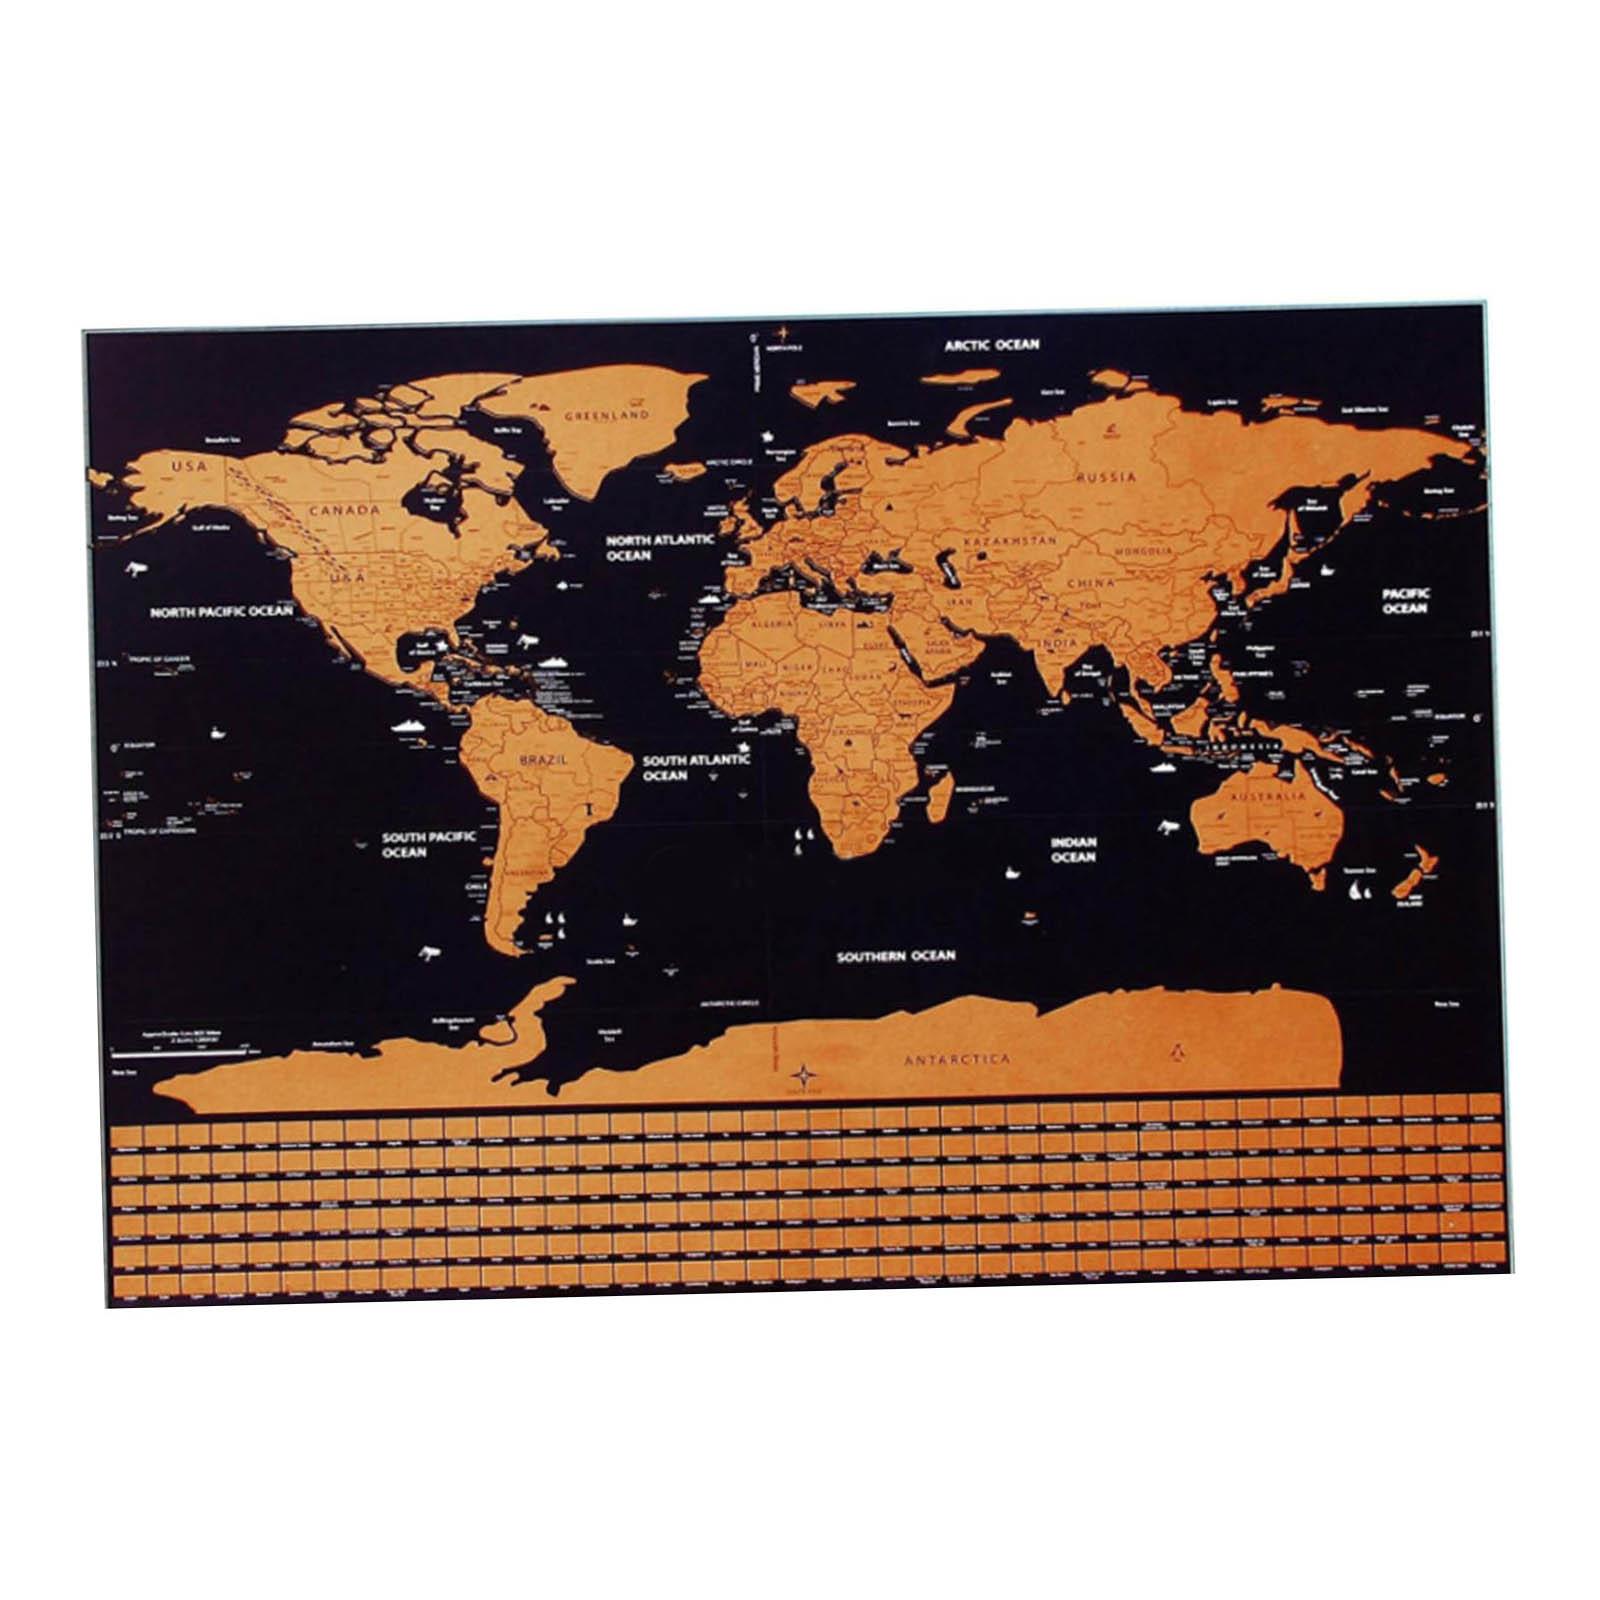 Deluxe Erase Black World Map Scratch off Personalized Travel Decor 42x30cm